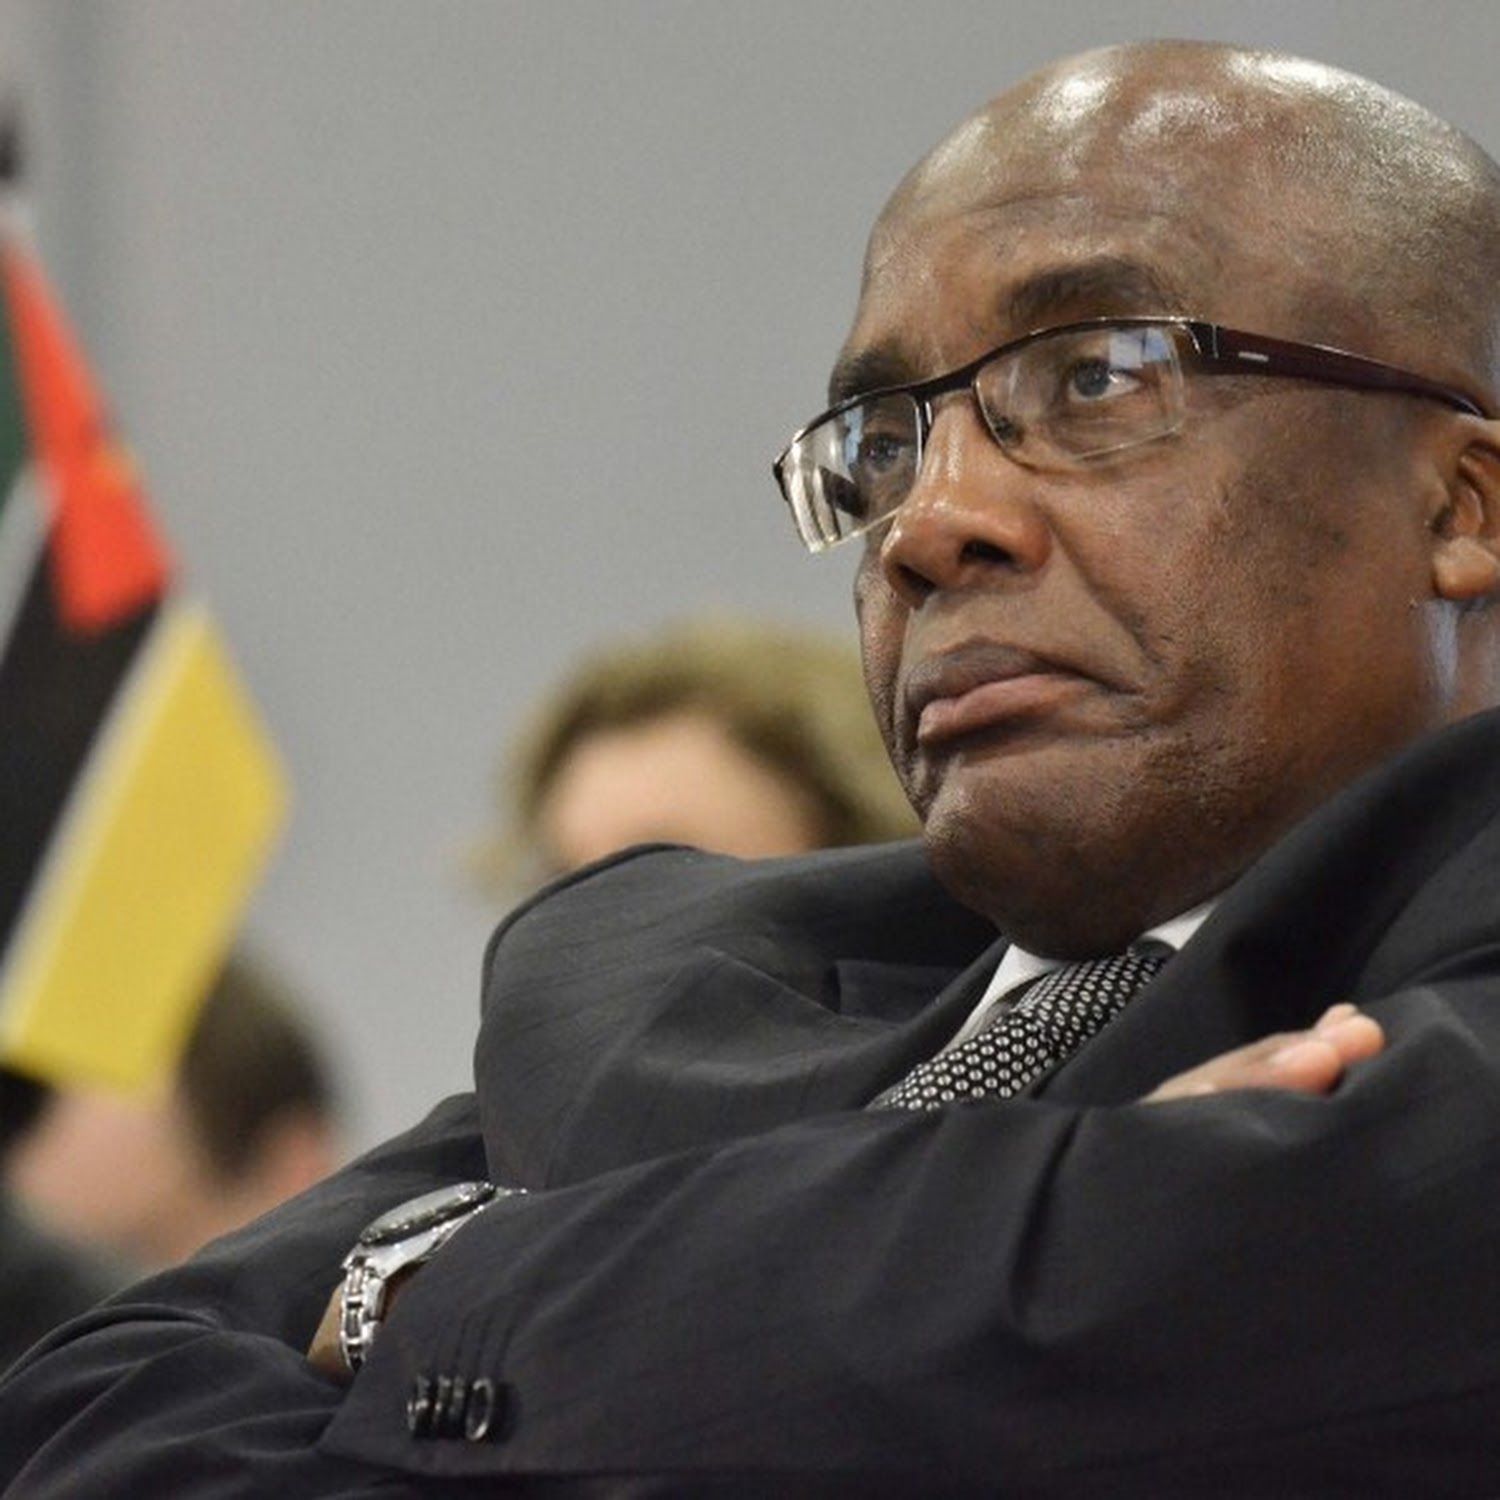 ConCourt Upholds Aaron Motsoaledi loses appeal bid on Zimbabwe exemption permits, Orders Motsoaledi to Pay Costs from his Own Pocket.